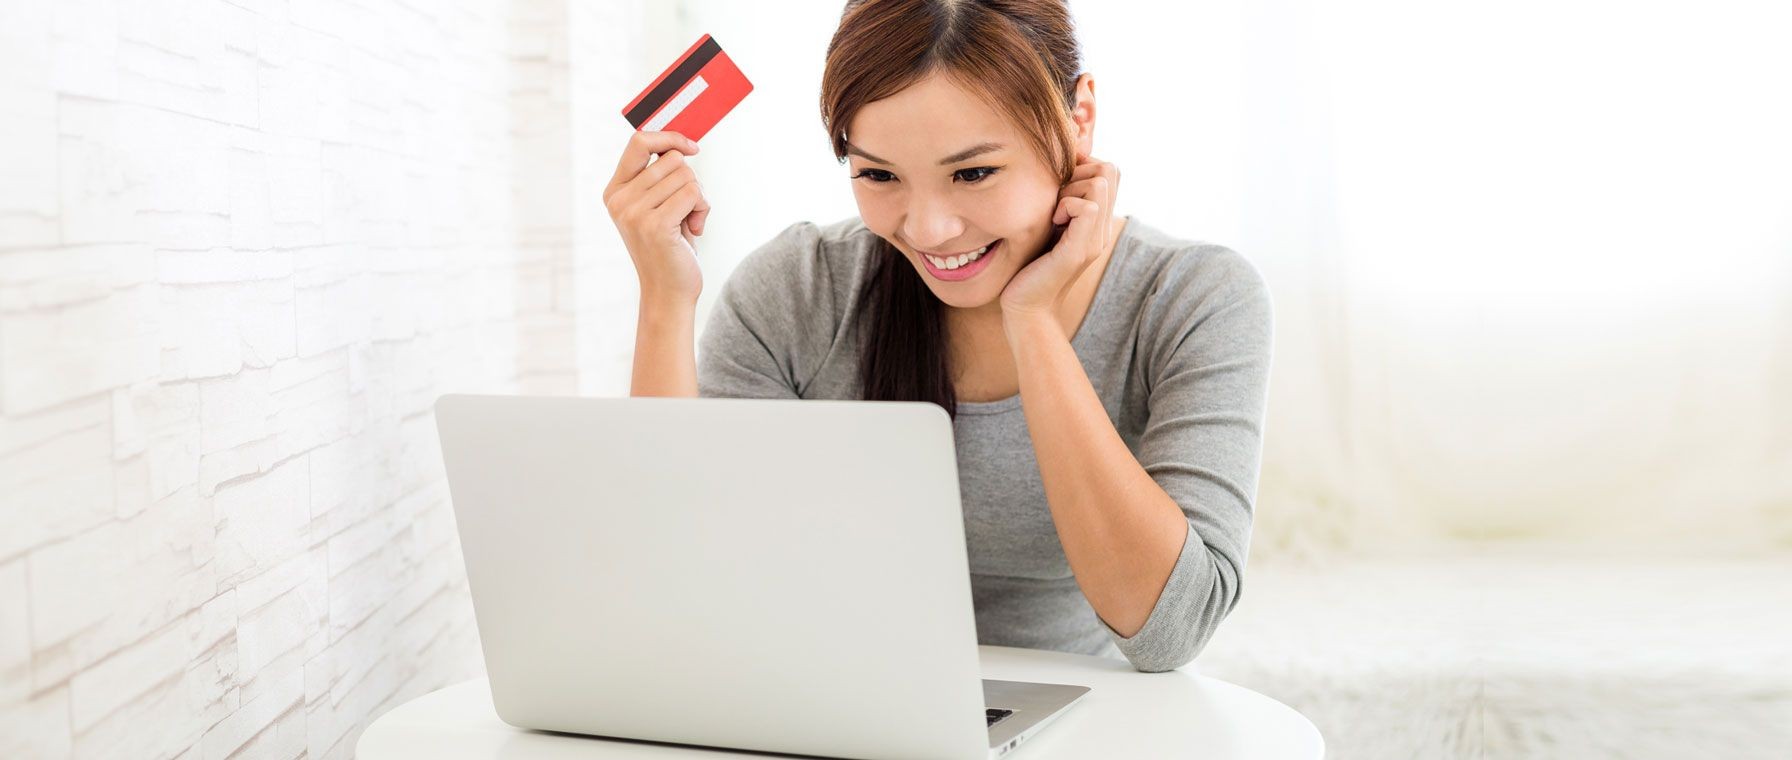 How to Send Money with a Debit Card